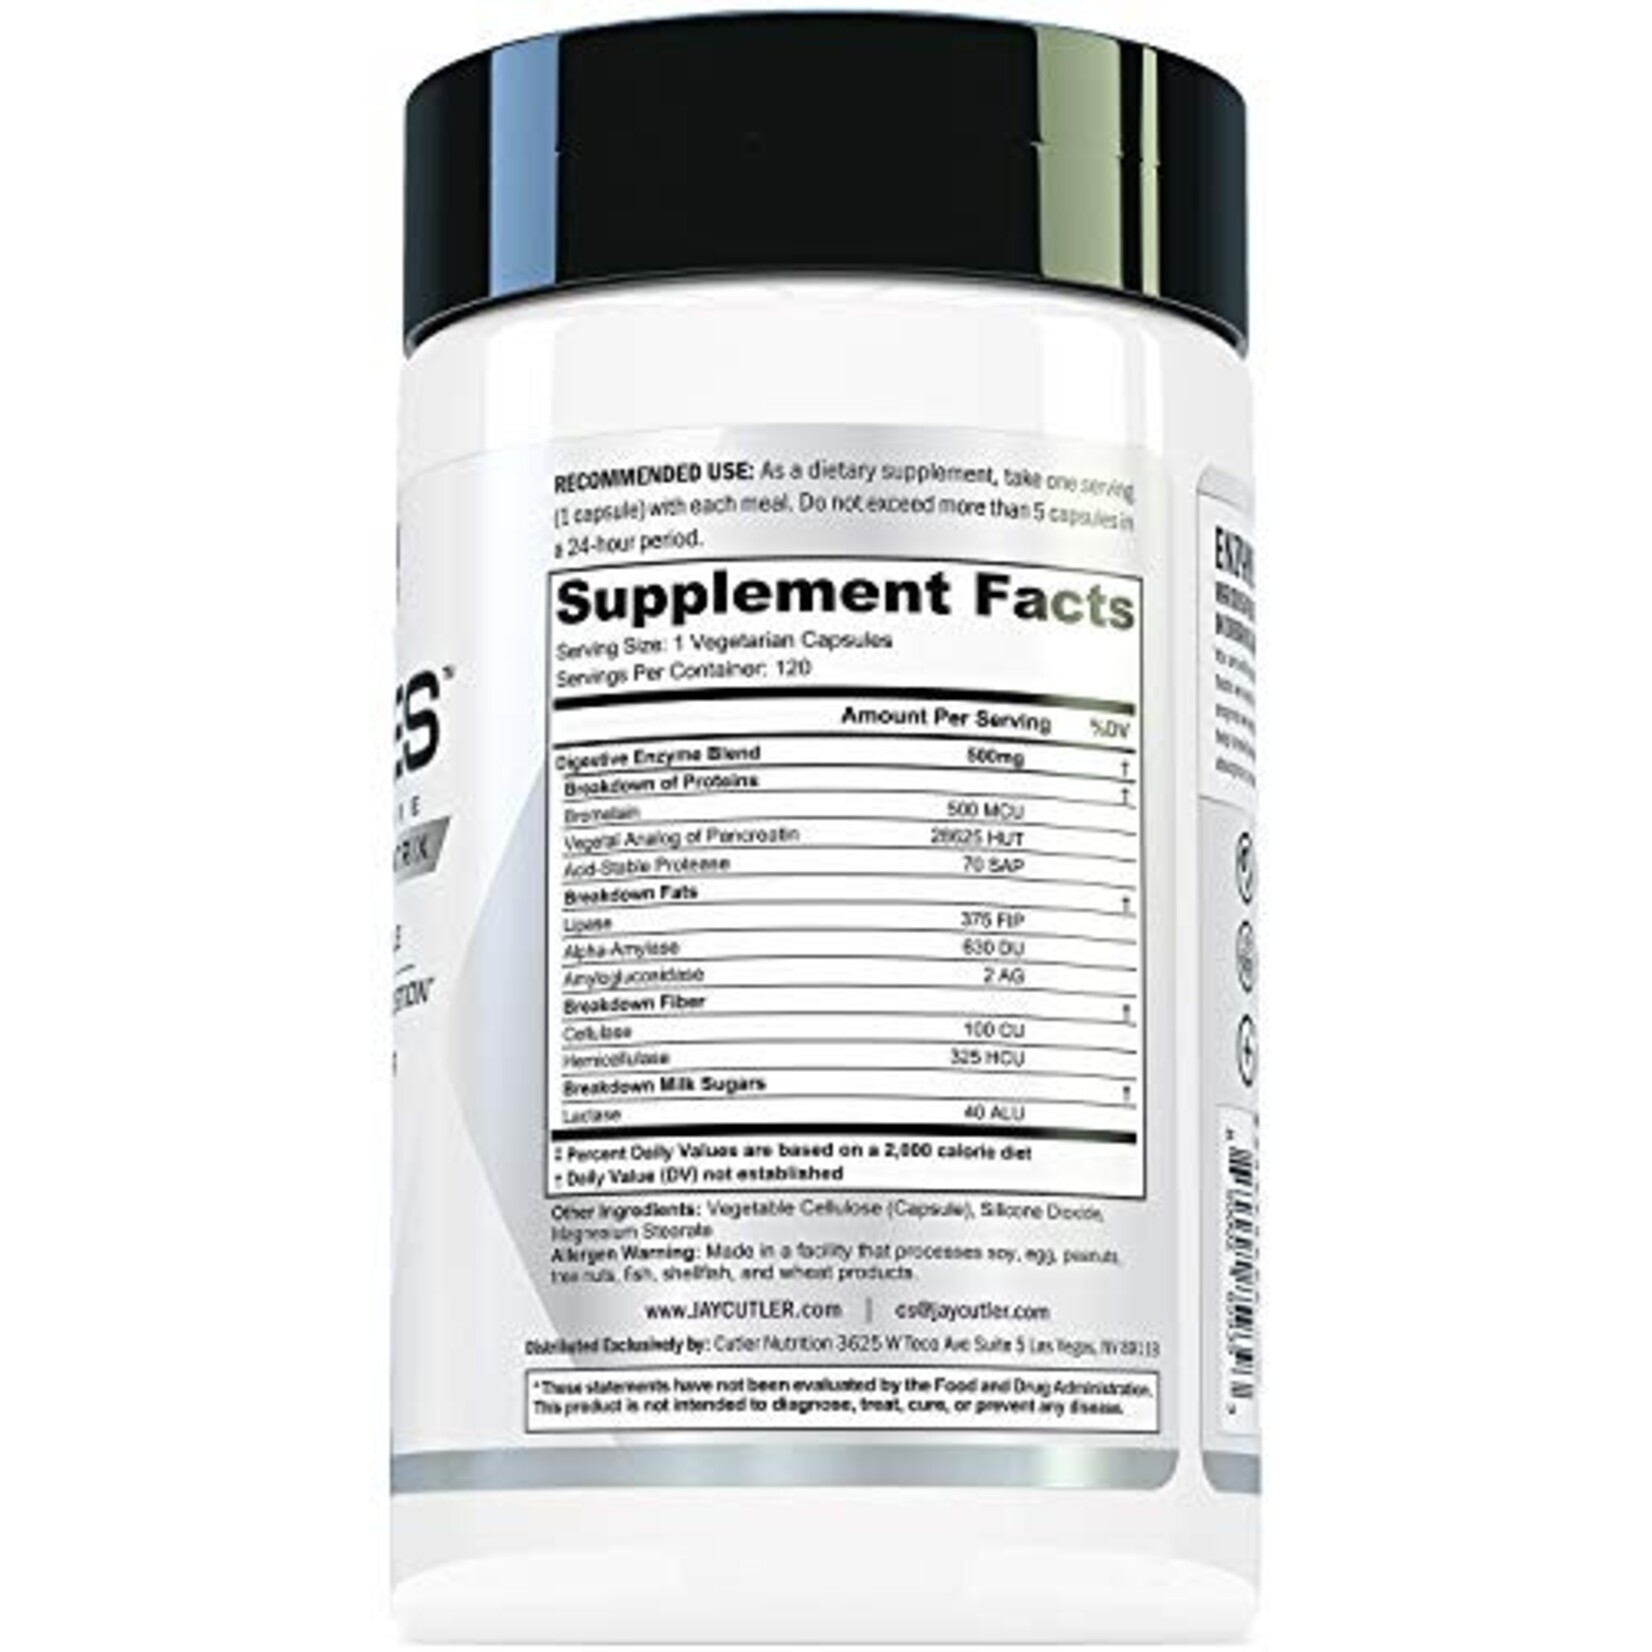 Cutler Nutrition 9-Zymes